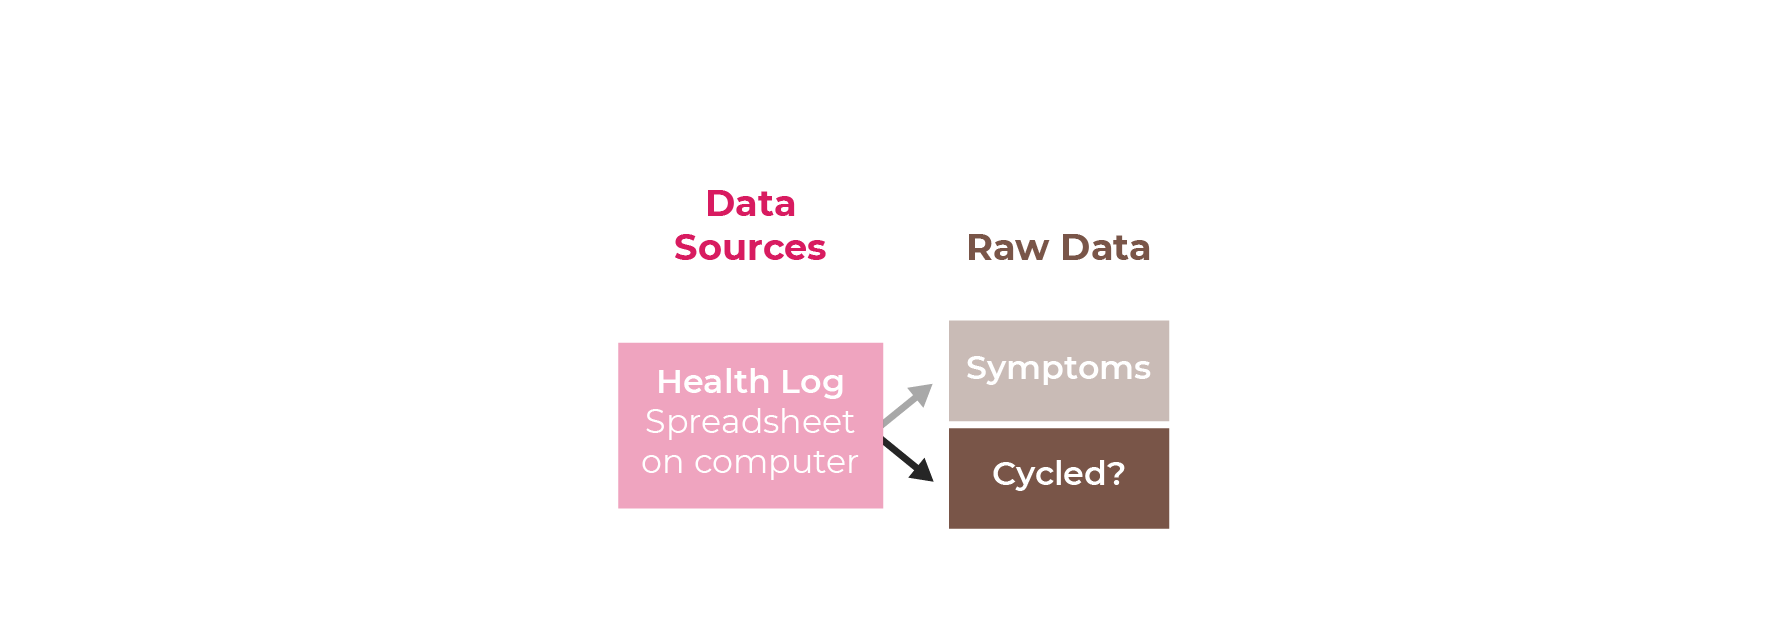 A picture shows the data pipeline sourcing from Zara’s health log. The raw data extracted from it are the symptoms and which days she cycled.